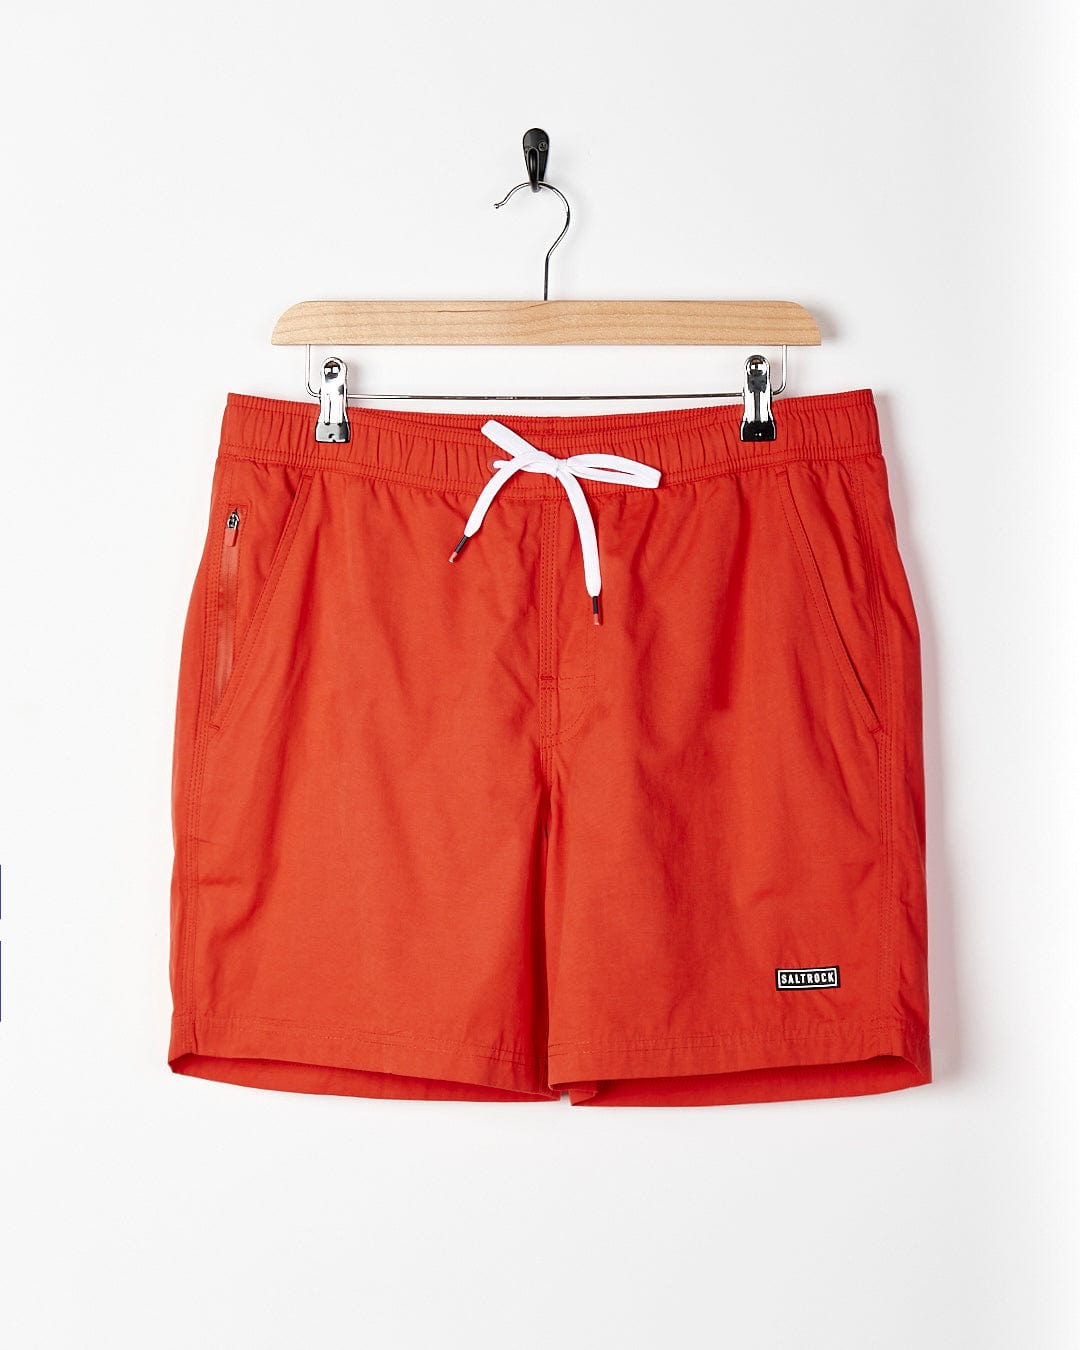 A Saltrock - Lee Mens Sueded Volley Swimshort - Red hanging on a hanger.